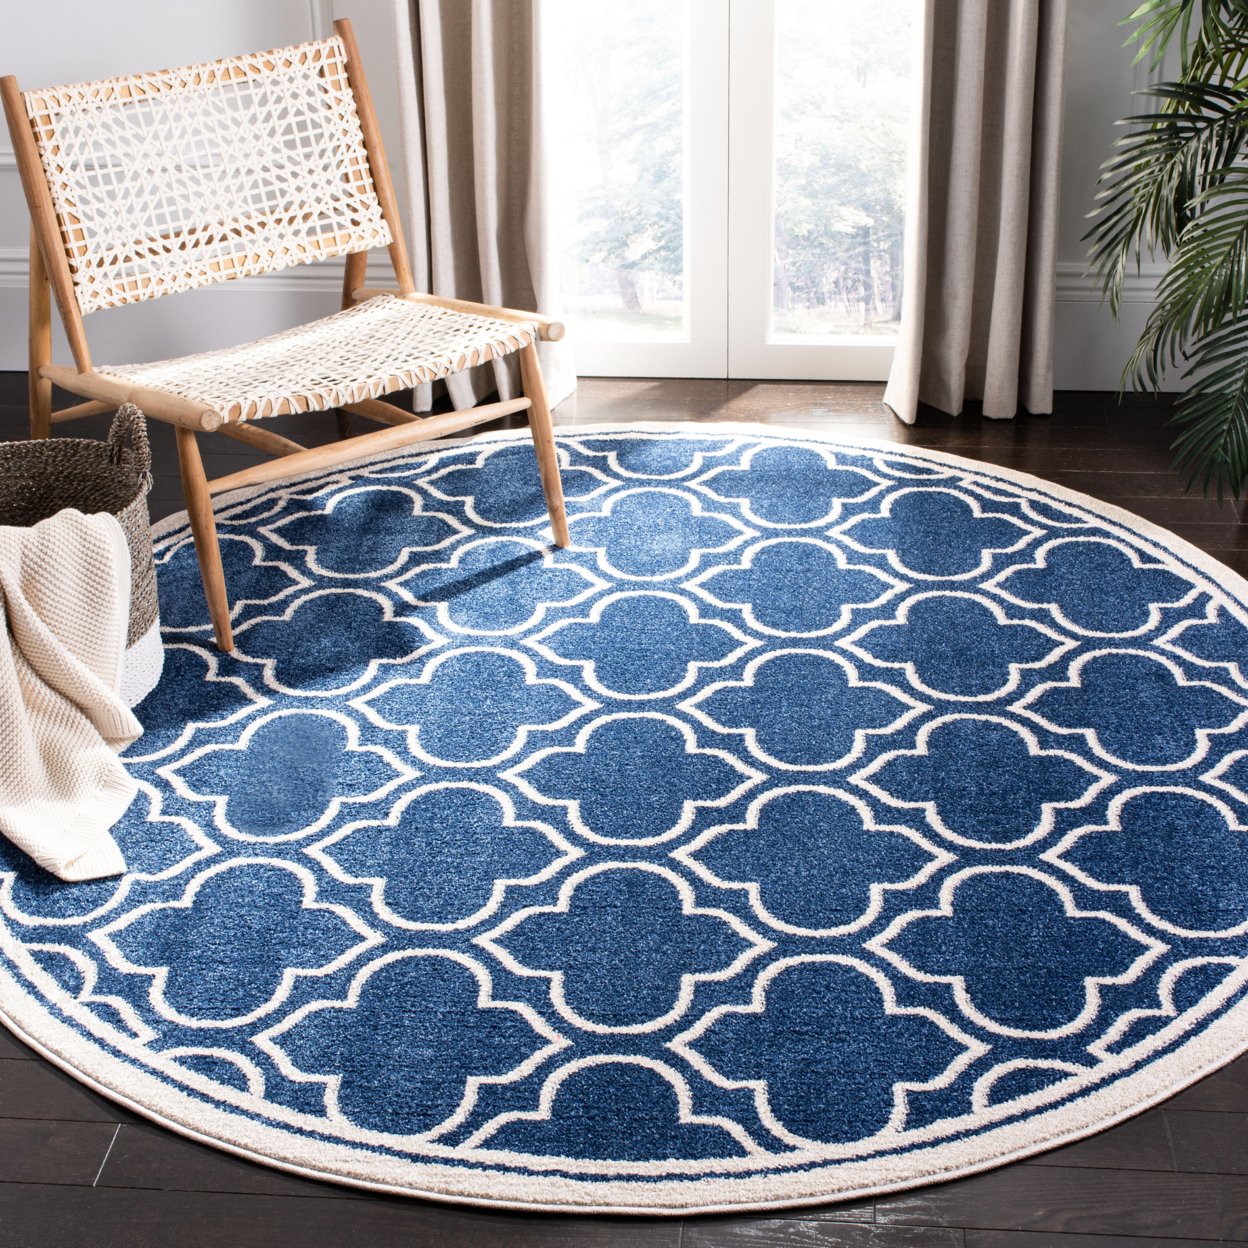 SAFAVIEH Amherst Collection AMT412P Navy / Ivory Rug - 7' Square